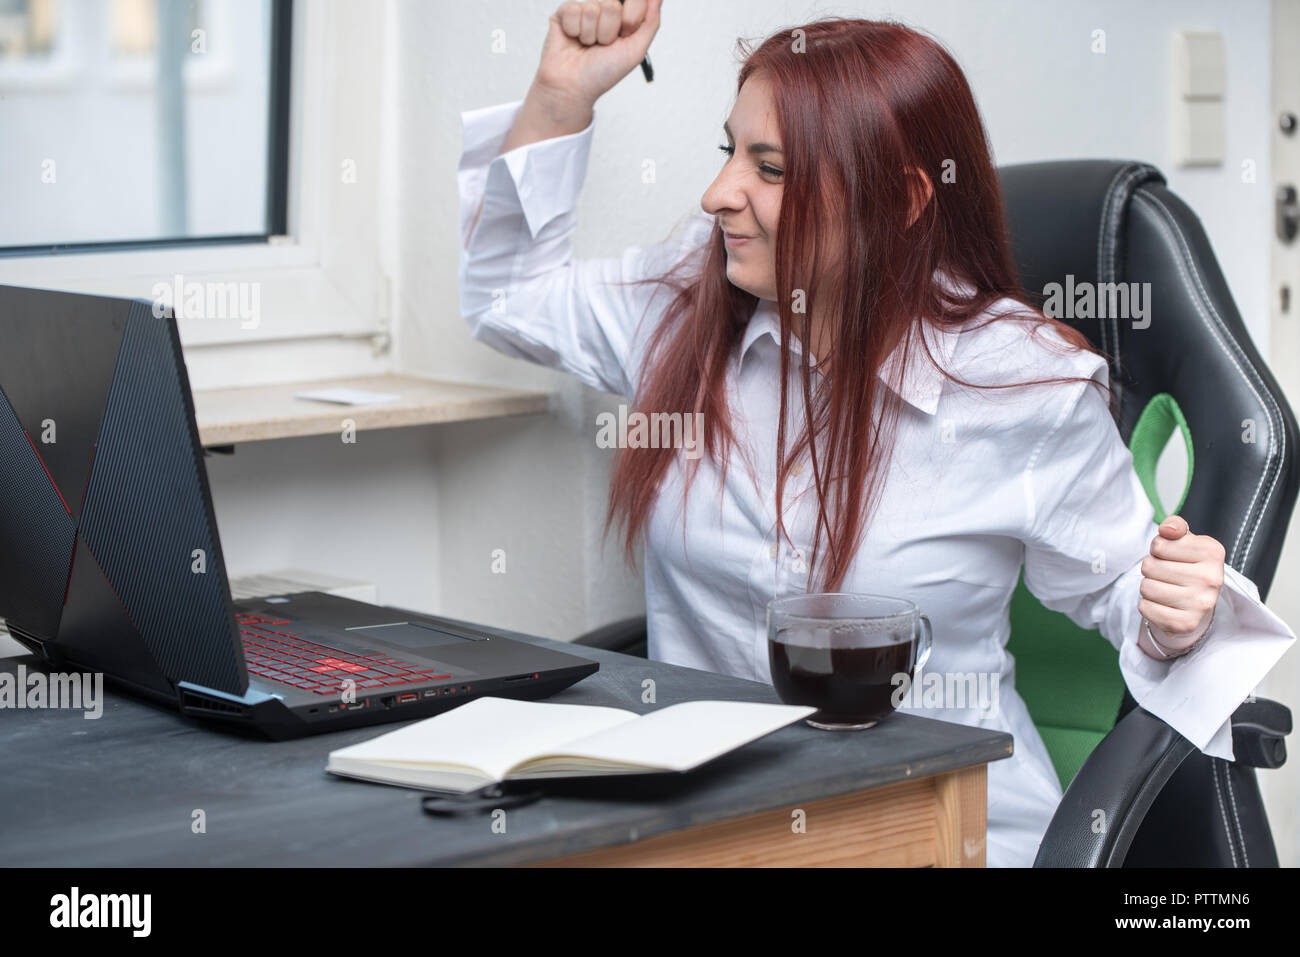 a young woman at a desk with a laptop raises her hand up in the gesture of success, behaves as if she's gonna win Stock Photo